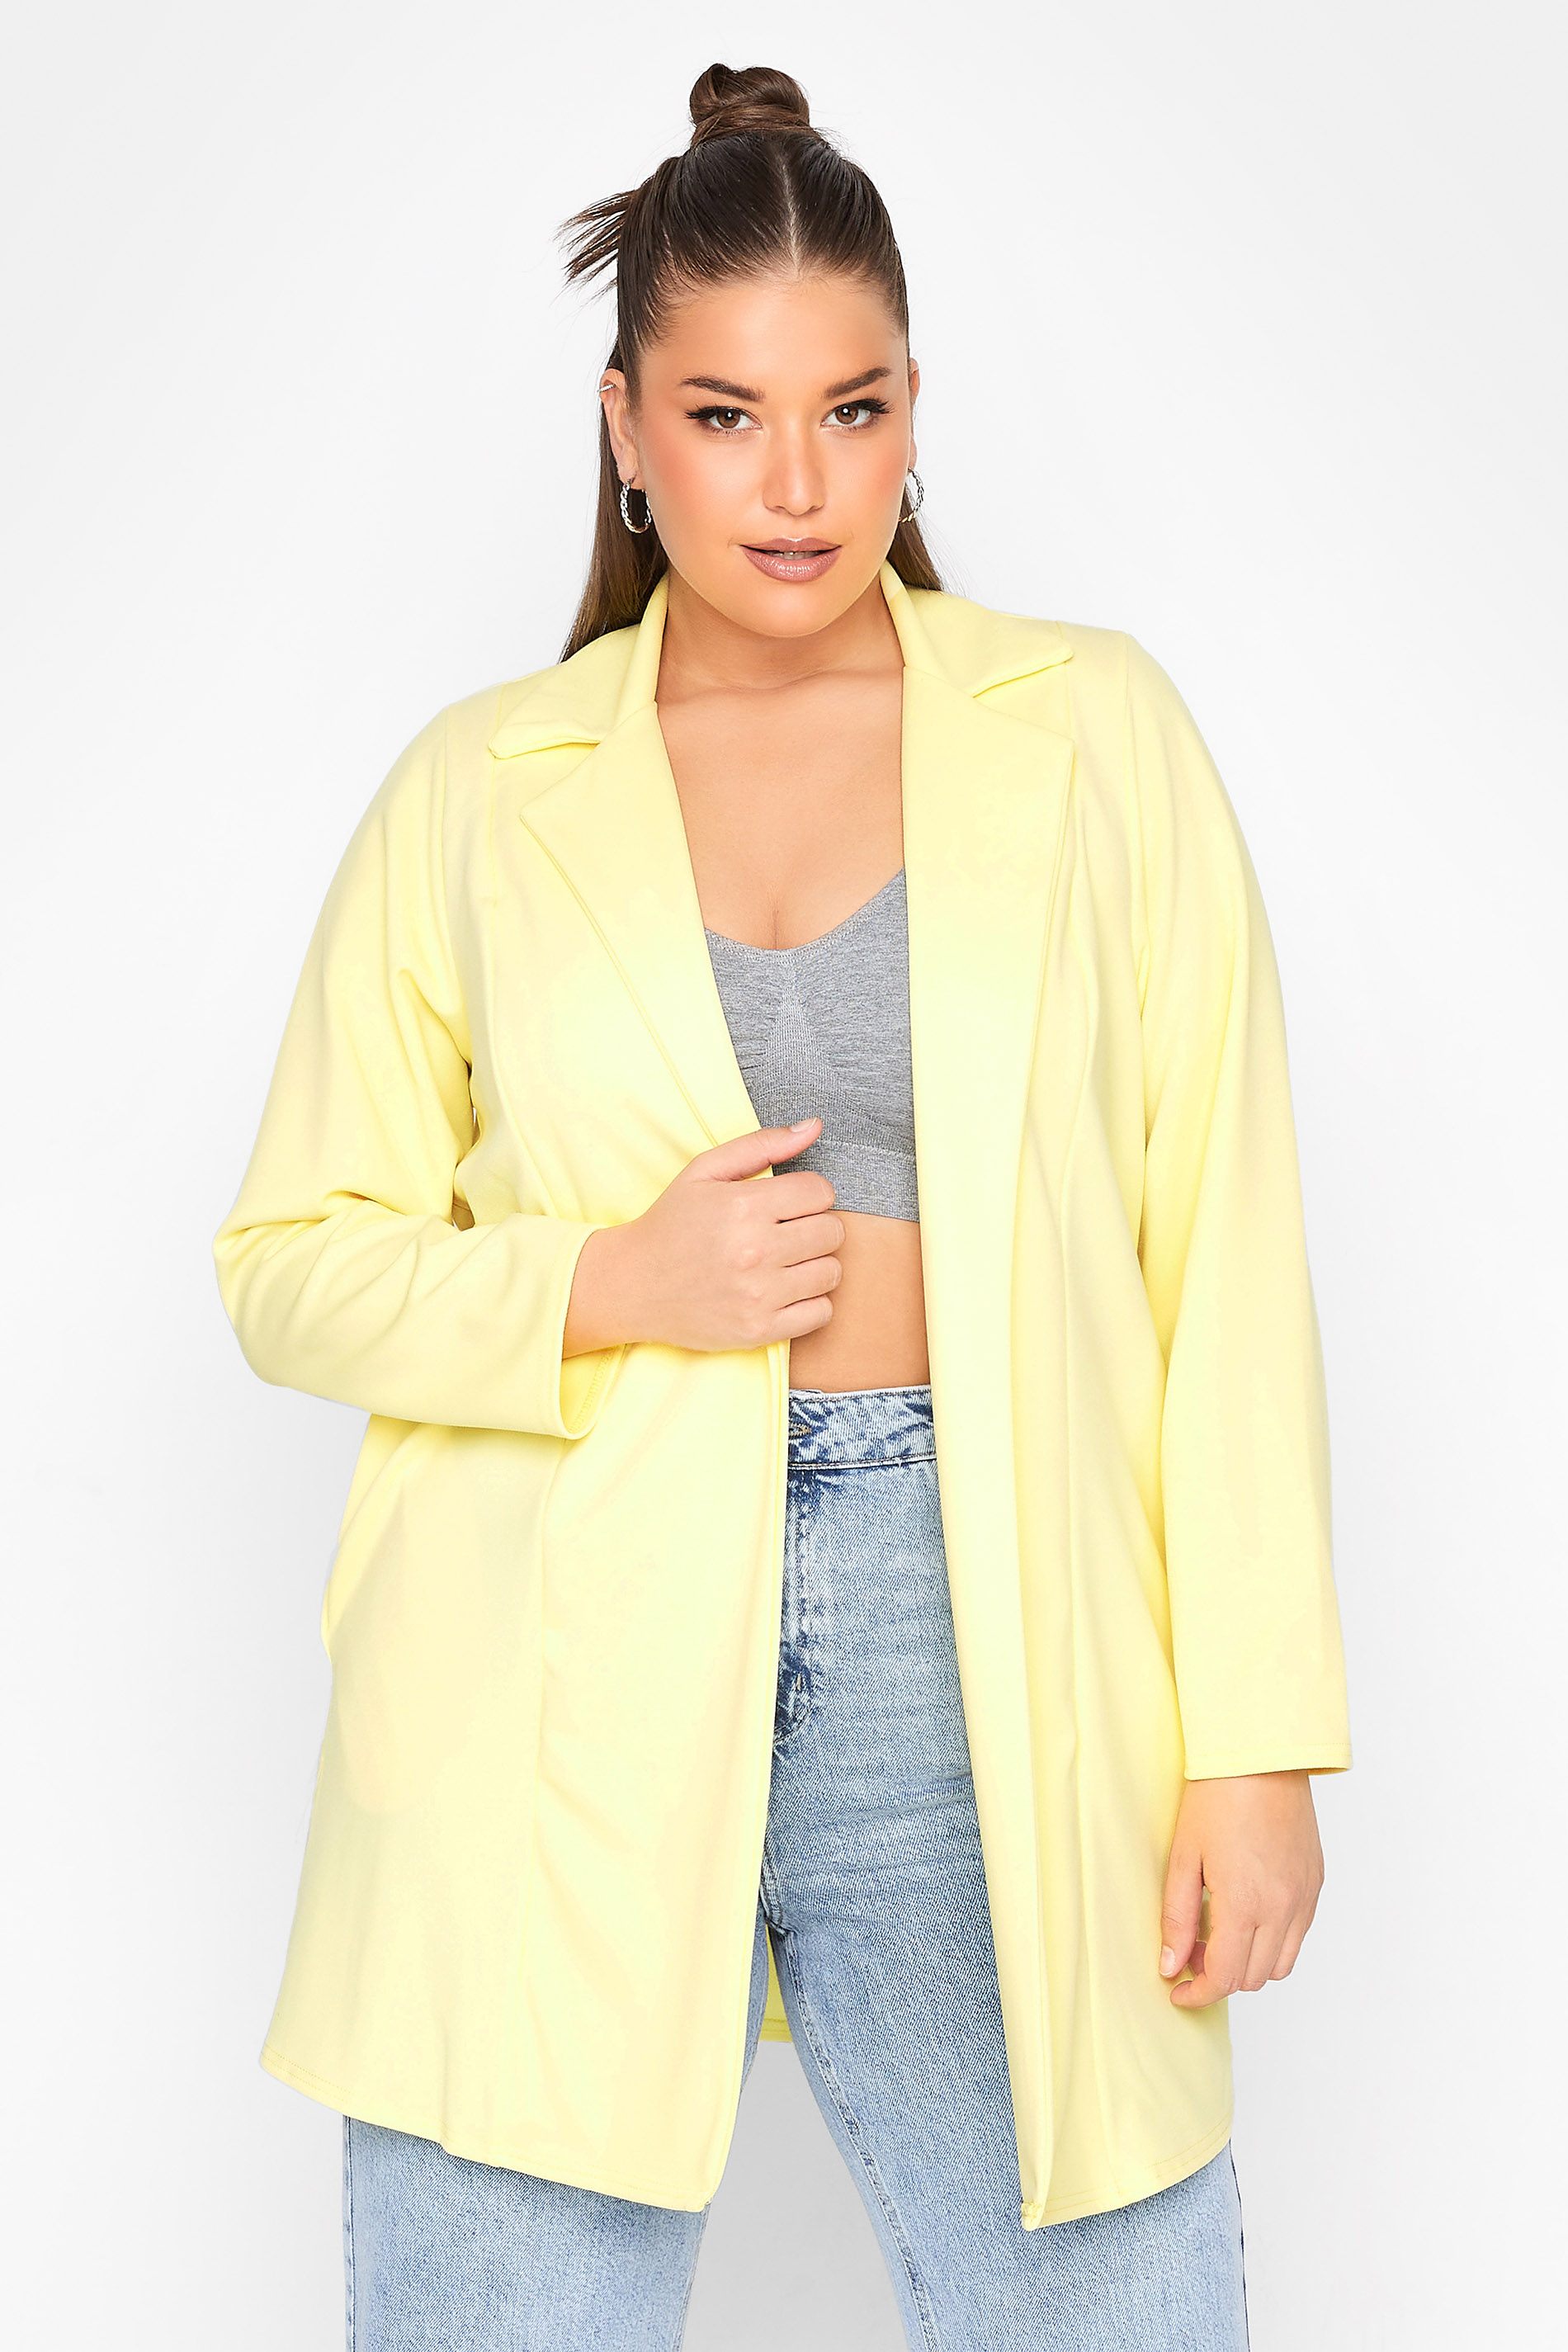 LIMITED COLLECTION Plus Size Lemon Yellow Long Sleeve Blazer | Yours Clothing 1